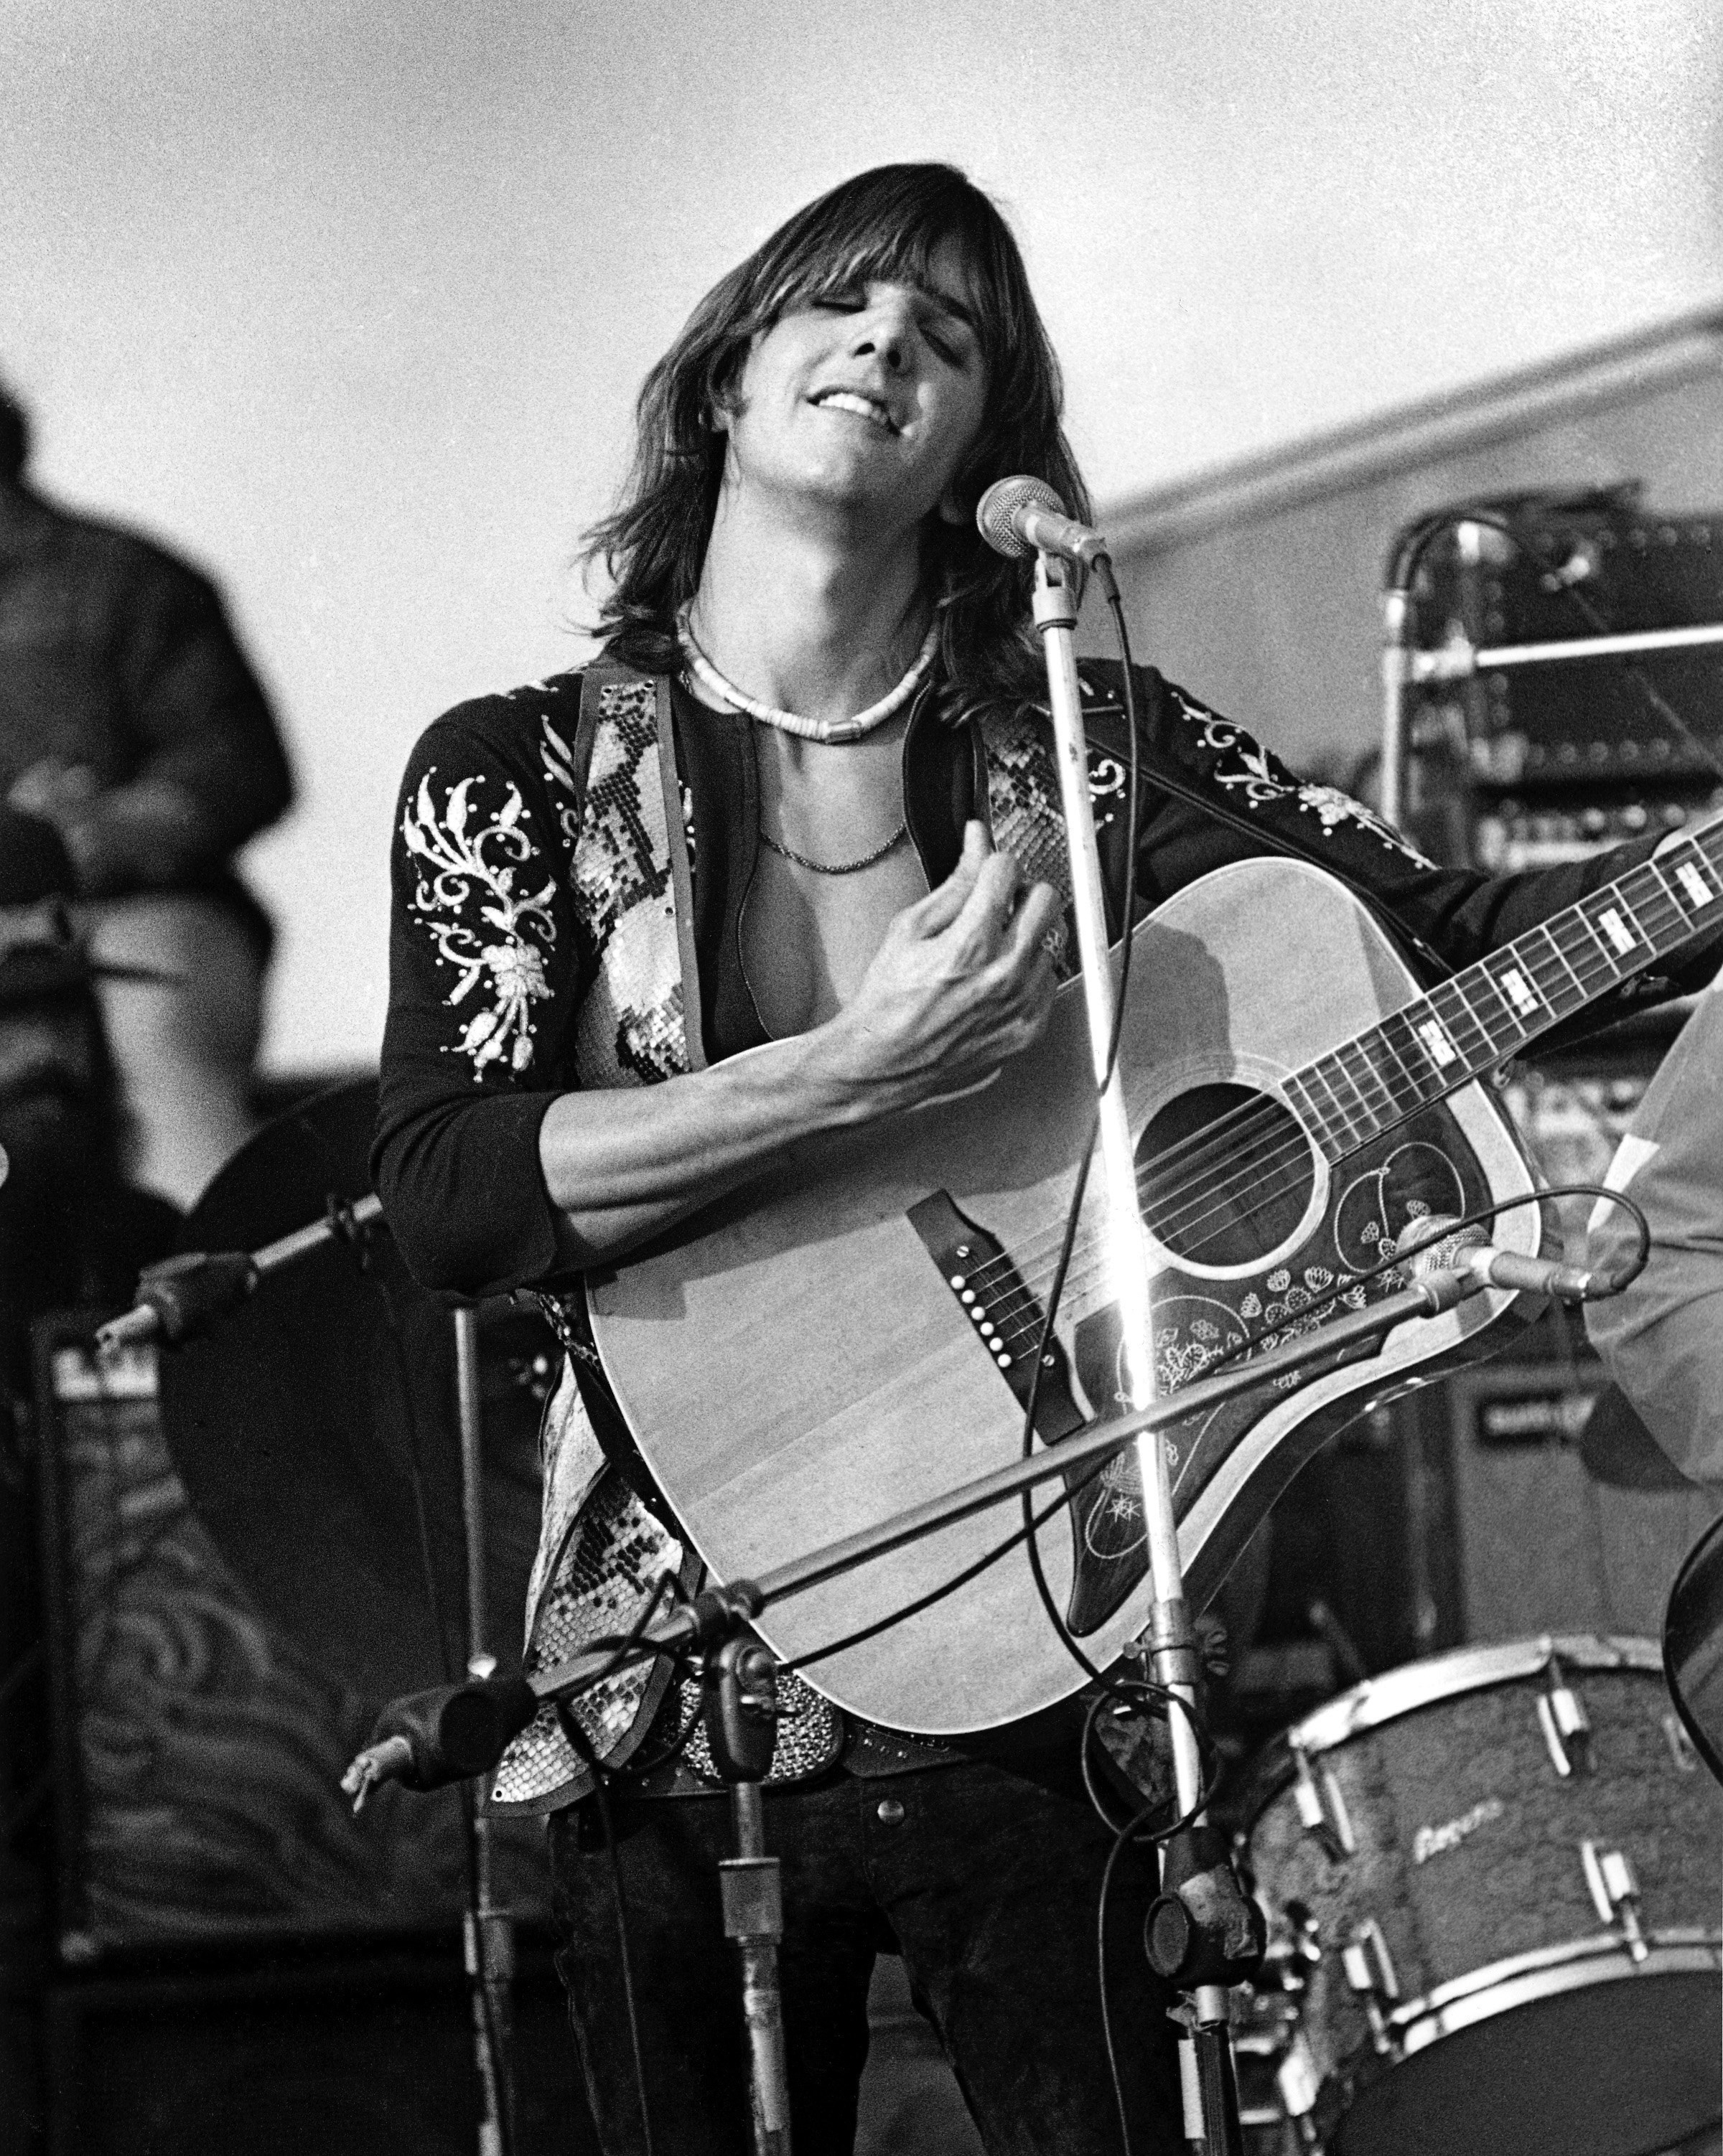 Gram Parsons of The Flying Burrito Brothers performs onstage at The Altamont Speedway on December 6, 1969 in Livermore, California